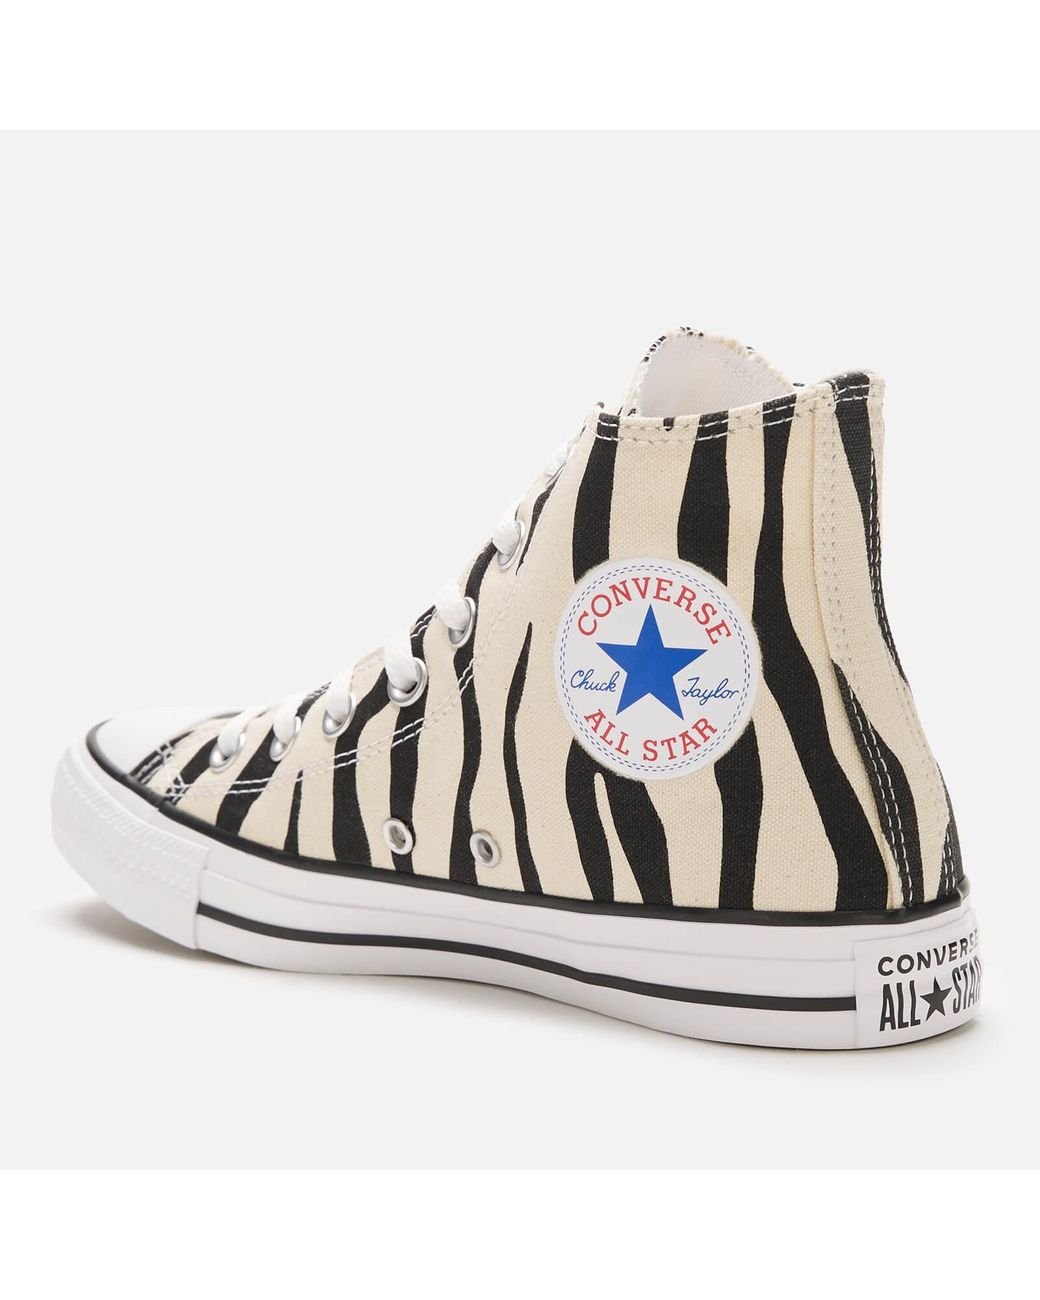 Converse Chuck Taylor All Star Hi Trainers With Zebra Print in Natural |  Lyst